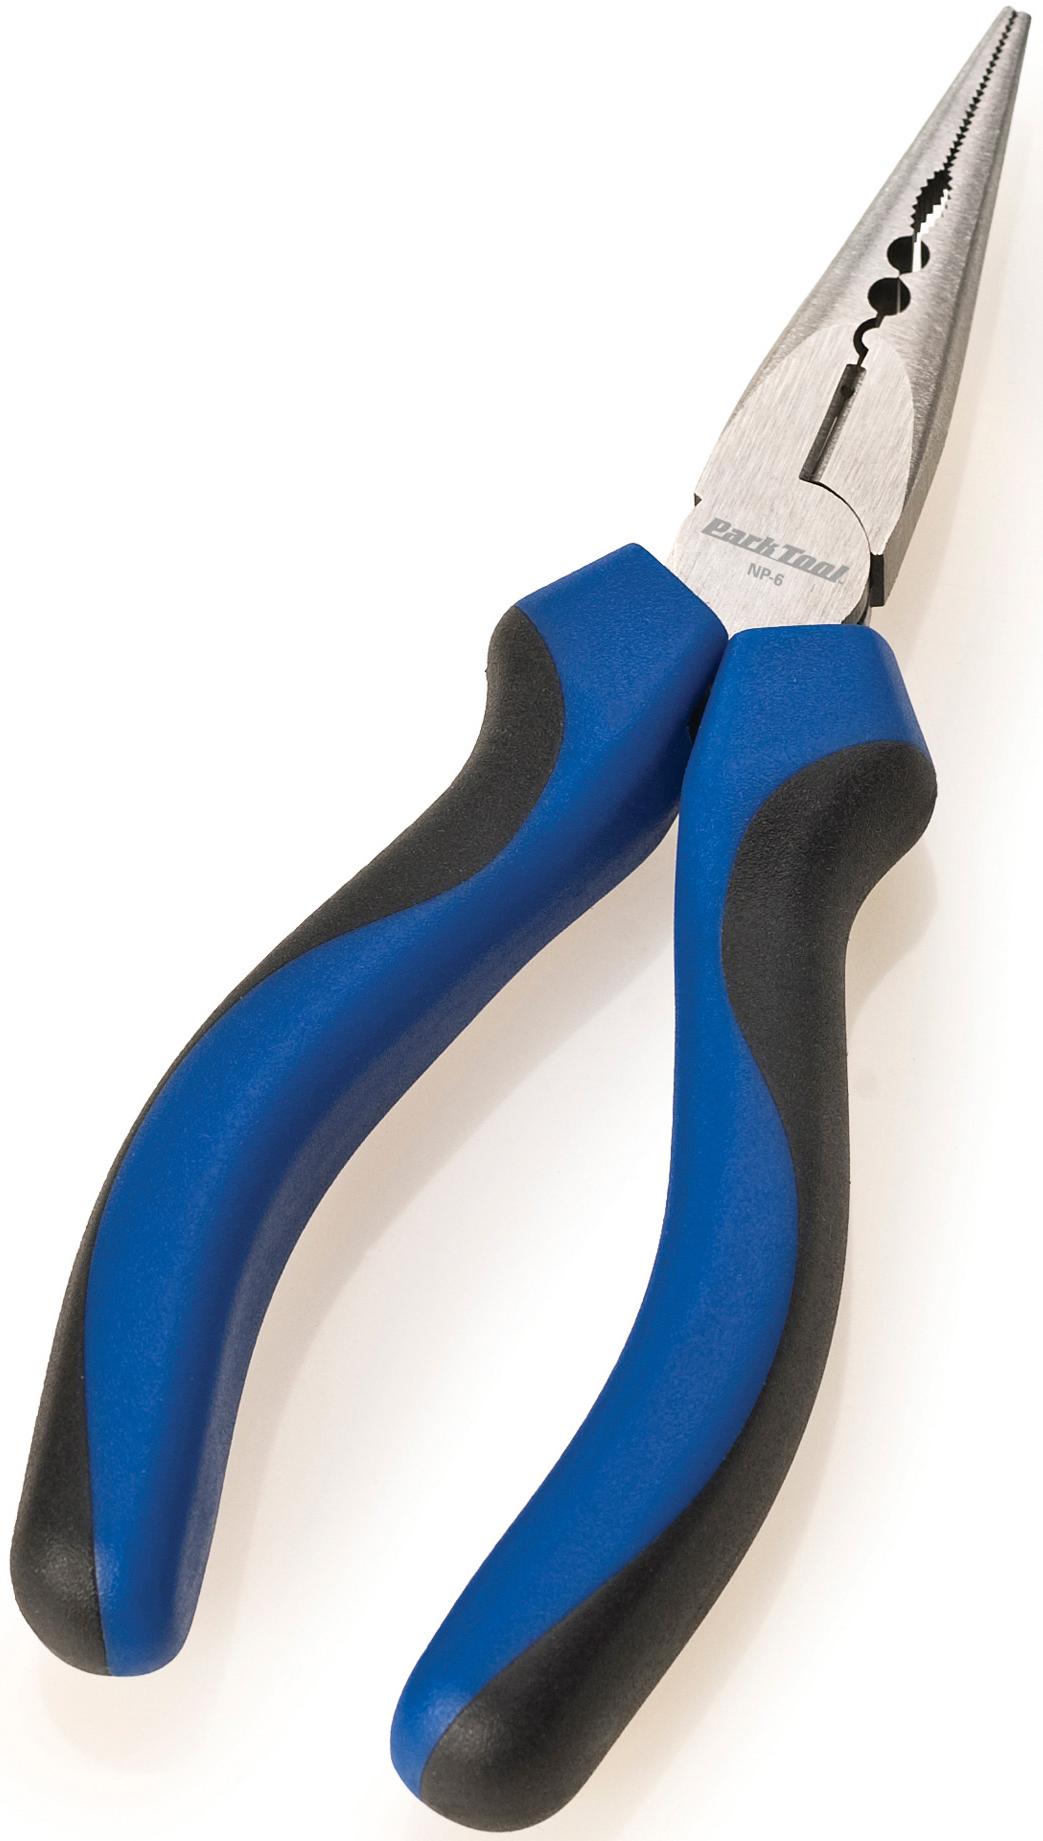 Park Tool Np-6 Needle Nose Pliers